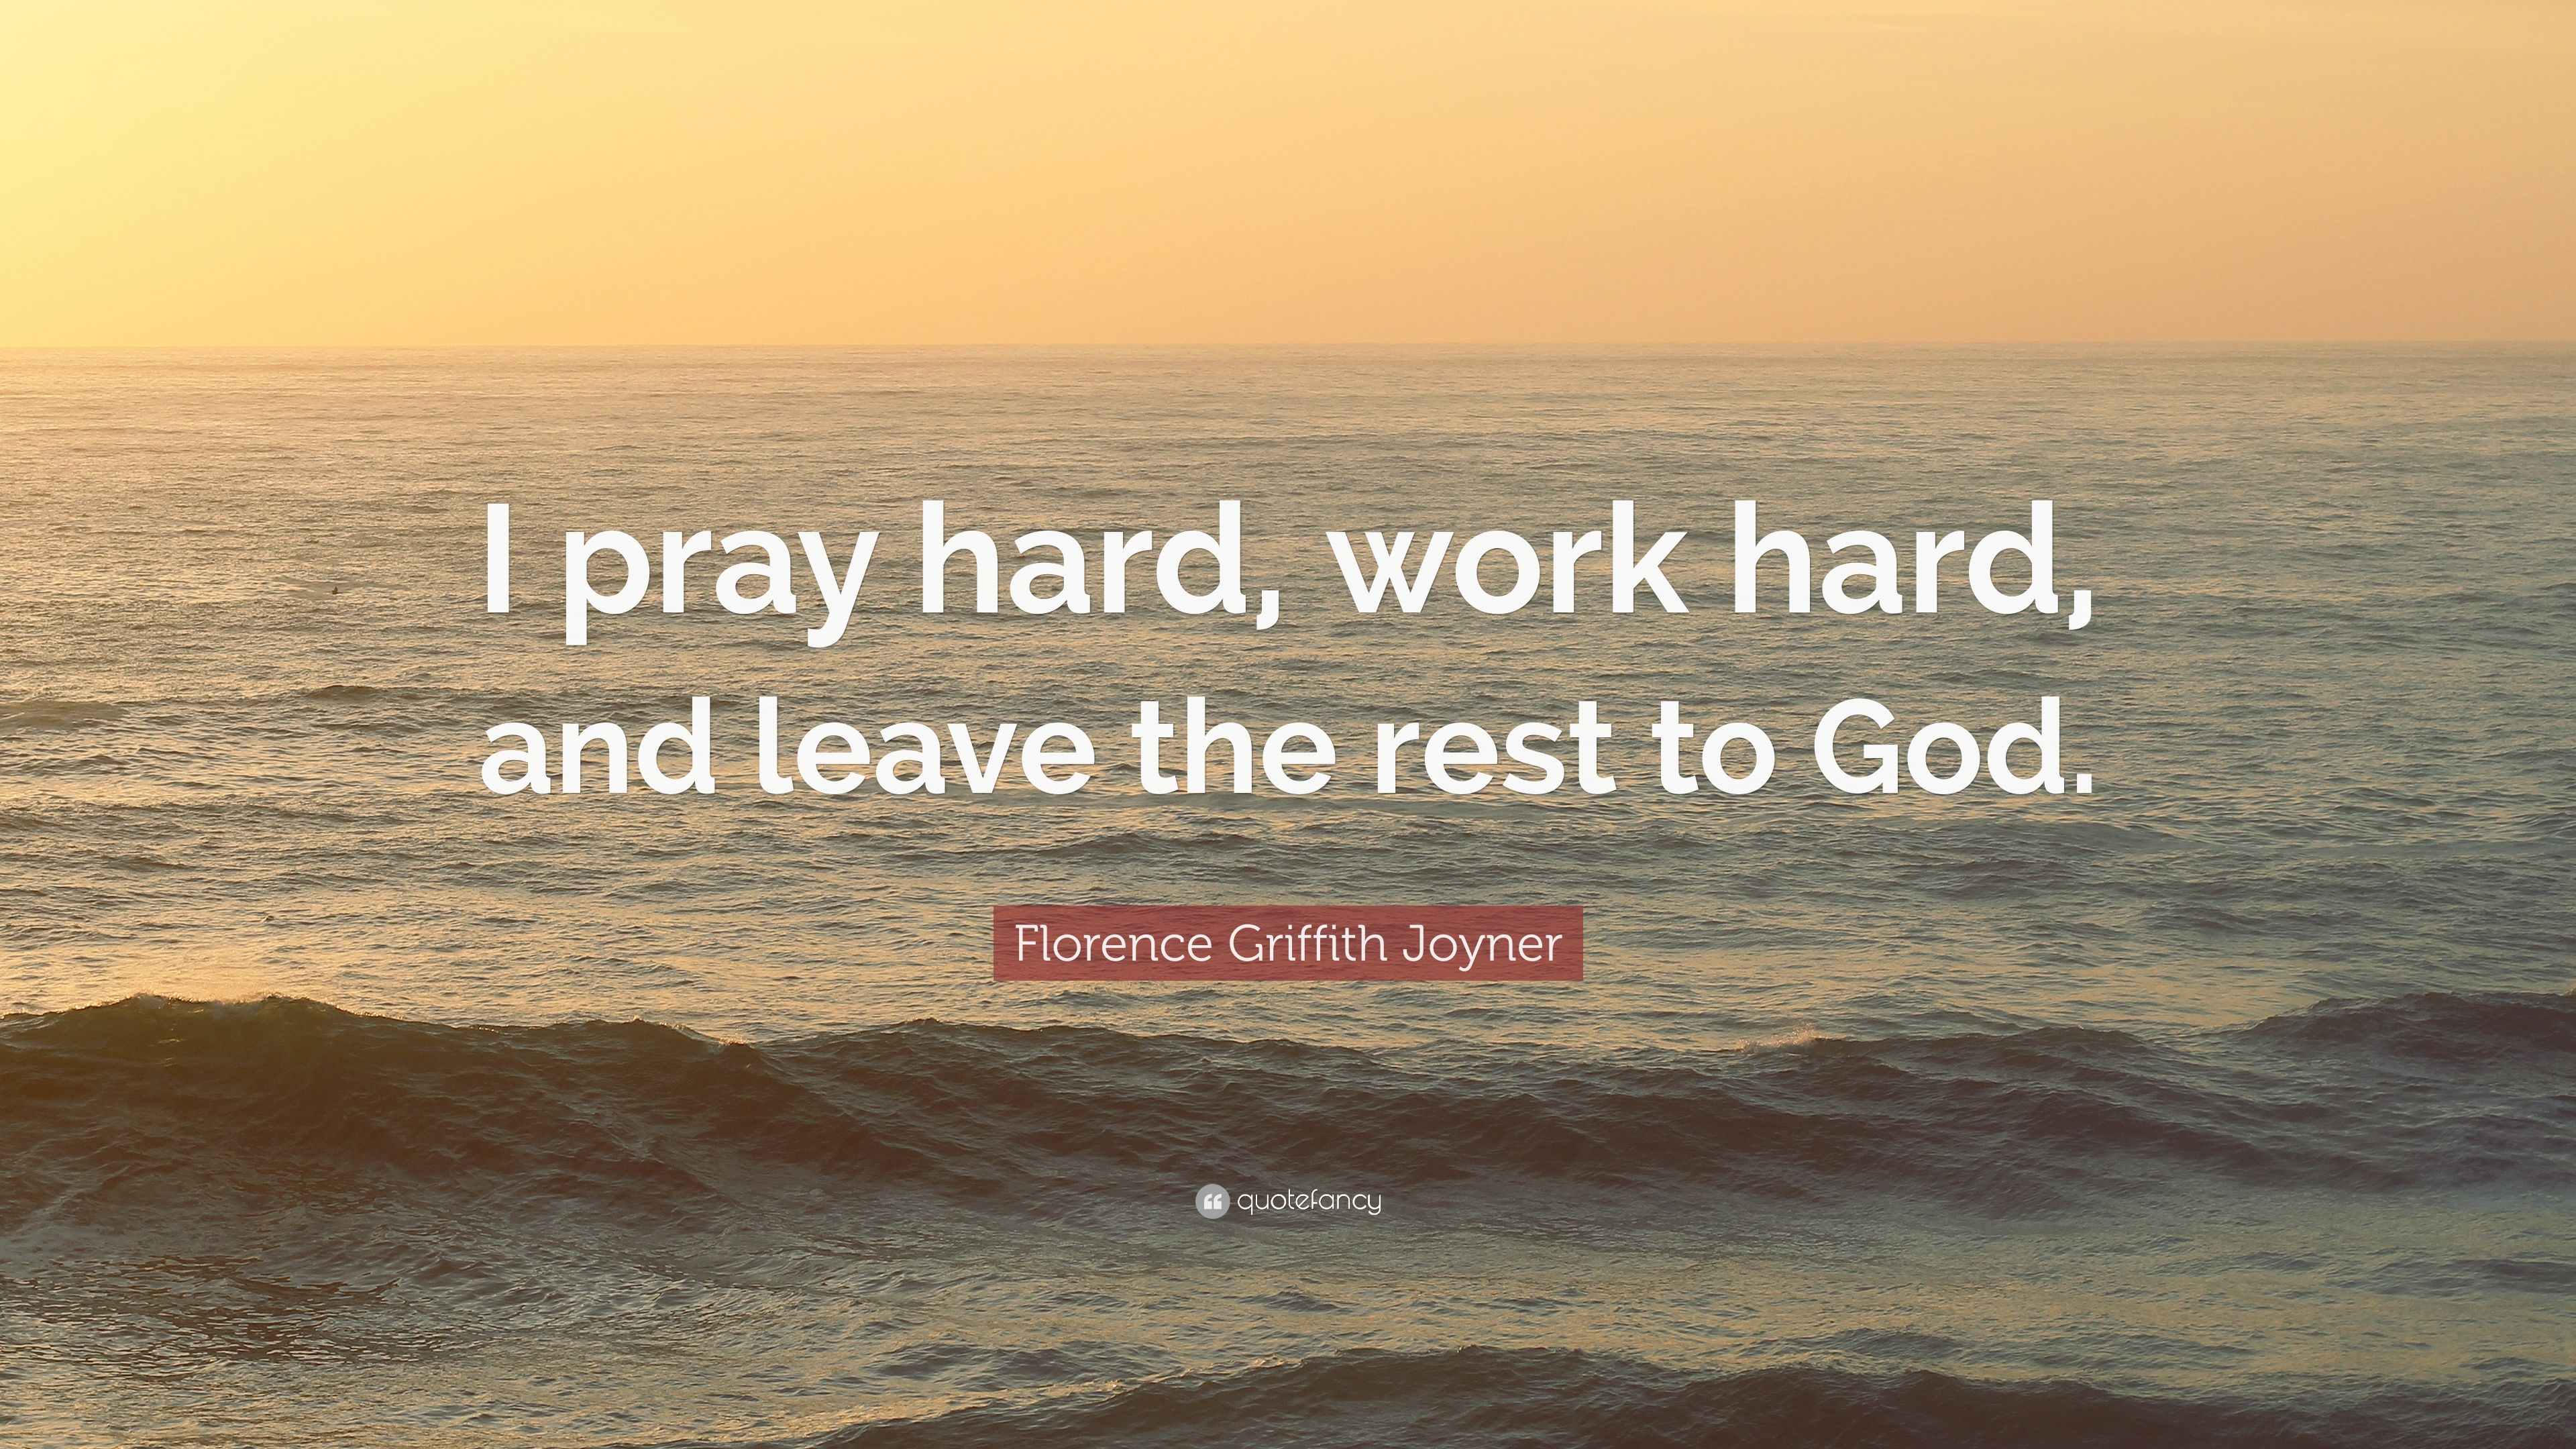 Florence Griffith Joyner Quote: “I pray hard, work hard, and leave the rest to God.” (12 wallpaper)